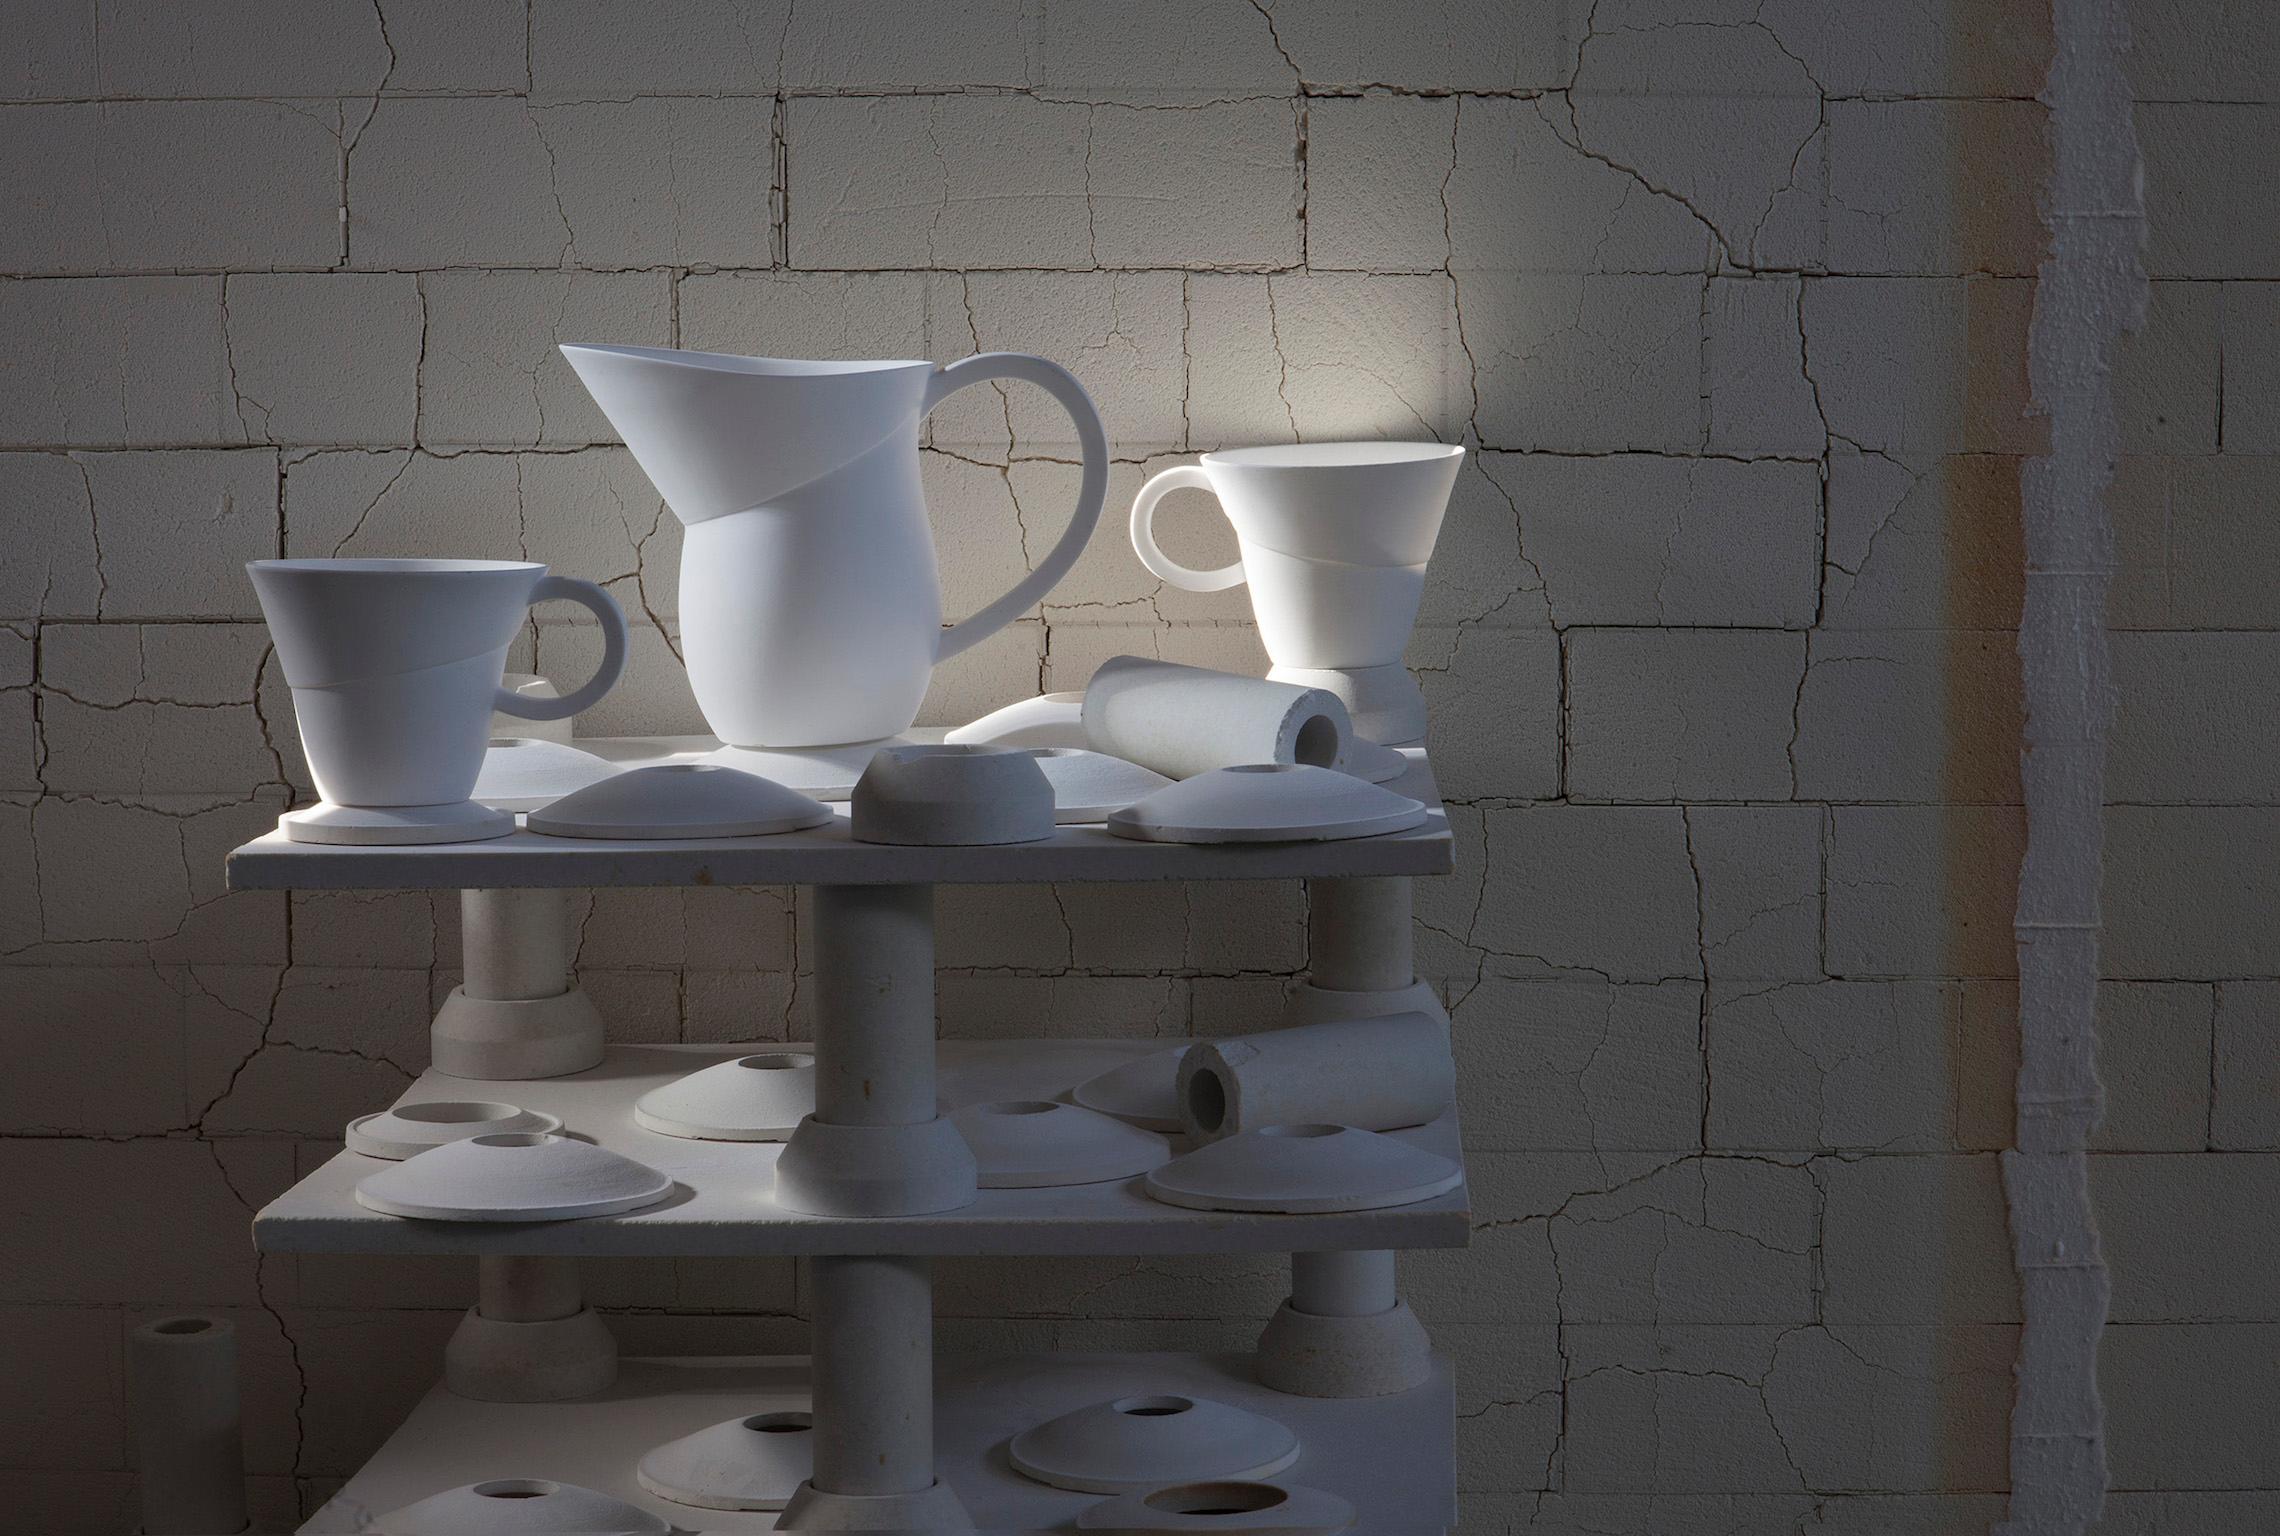 Flare, 1882 Ltd. with Pinch. Russell Pinch and Oona Bannon are renowned furniture and lighting designers and have reduced the scale in which they design to create Flare. Flare is a fine bone china collection that involves generous and curvaceous